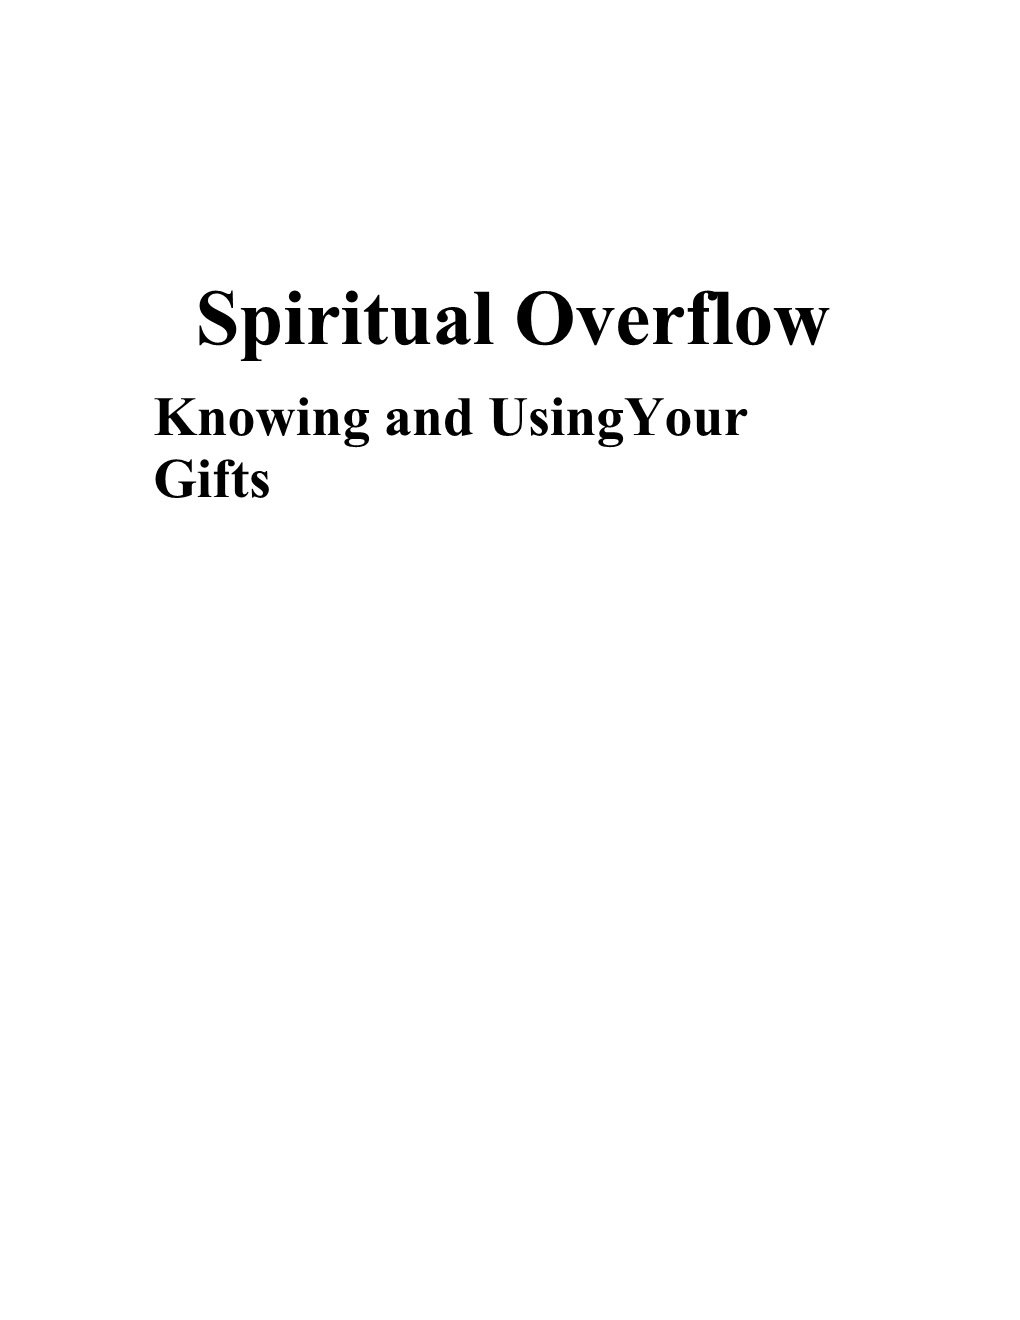 Knowing and Usingyour Gifts